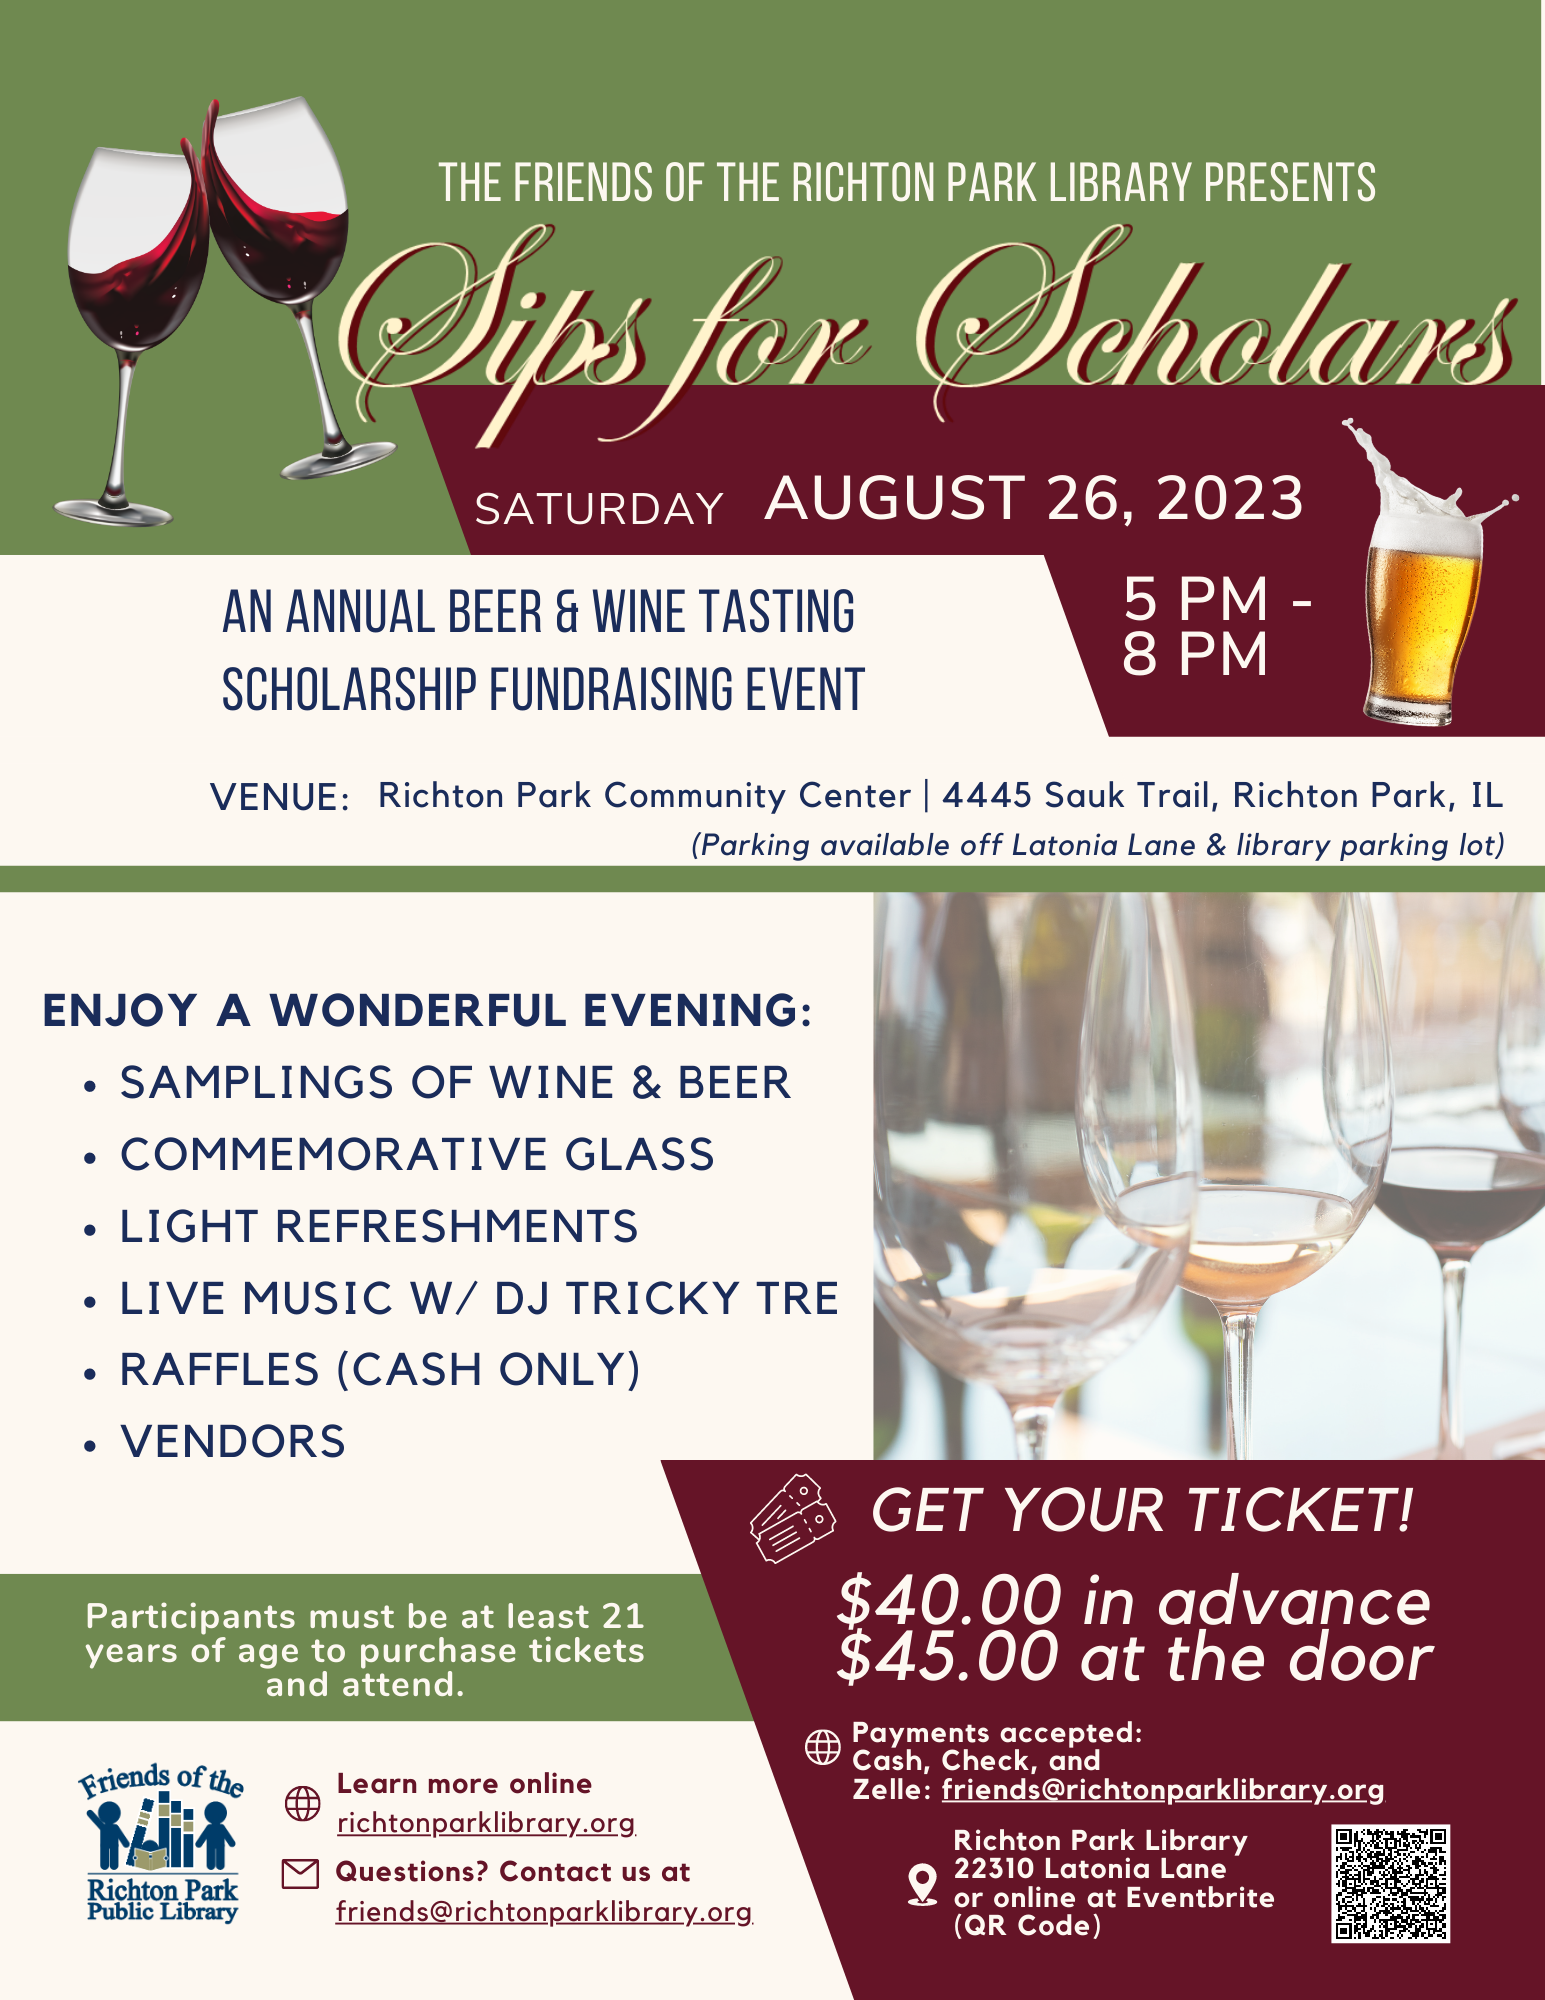 Flyer for Sips for Scholars with event information.